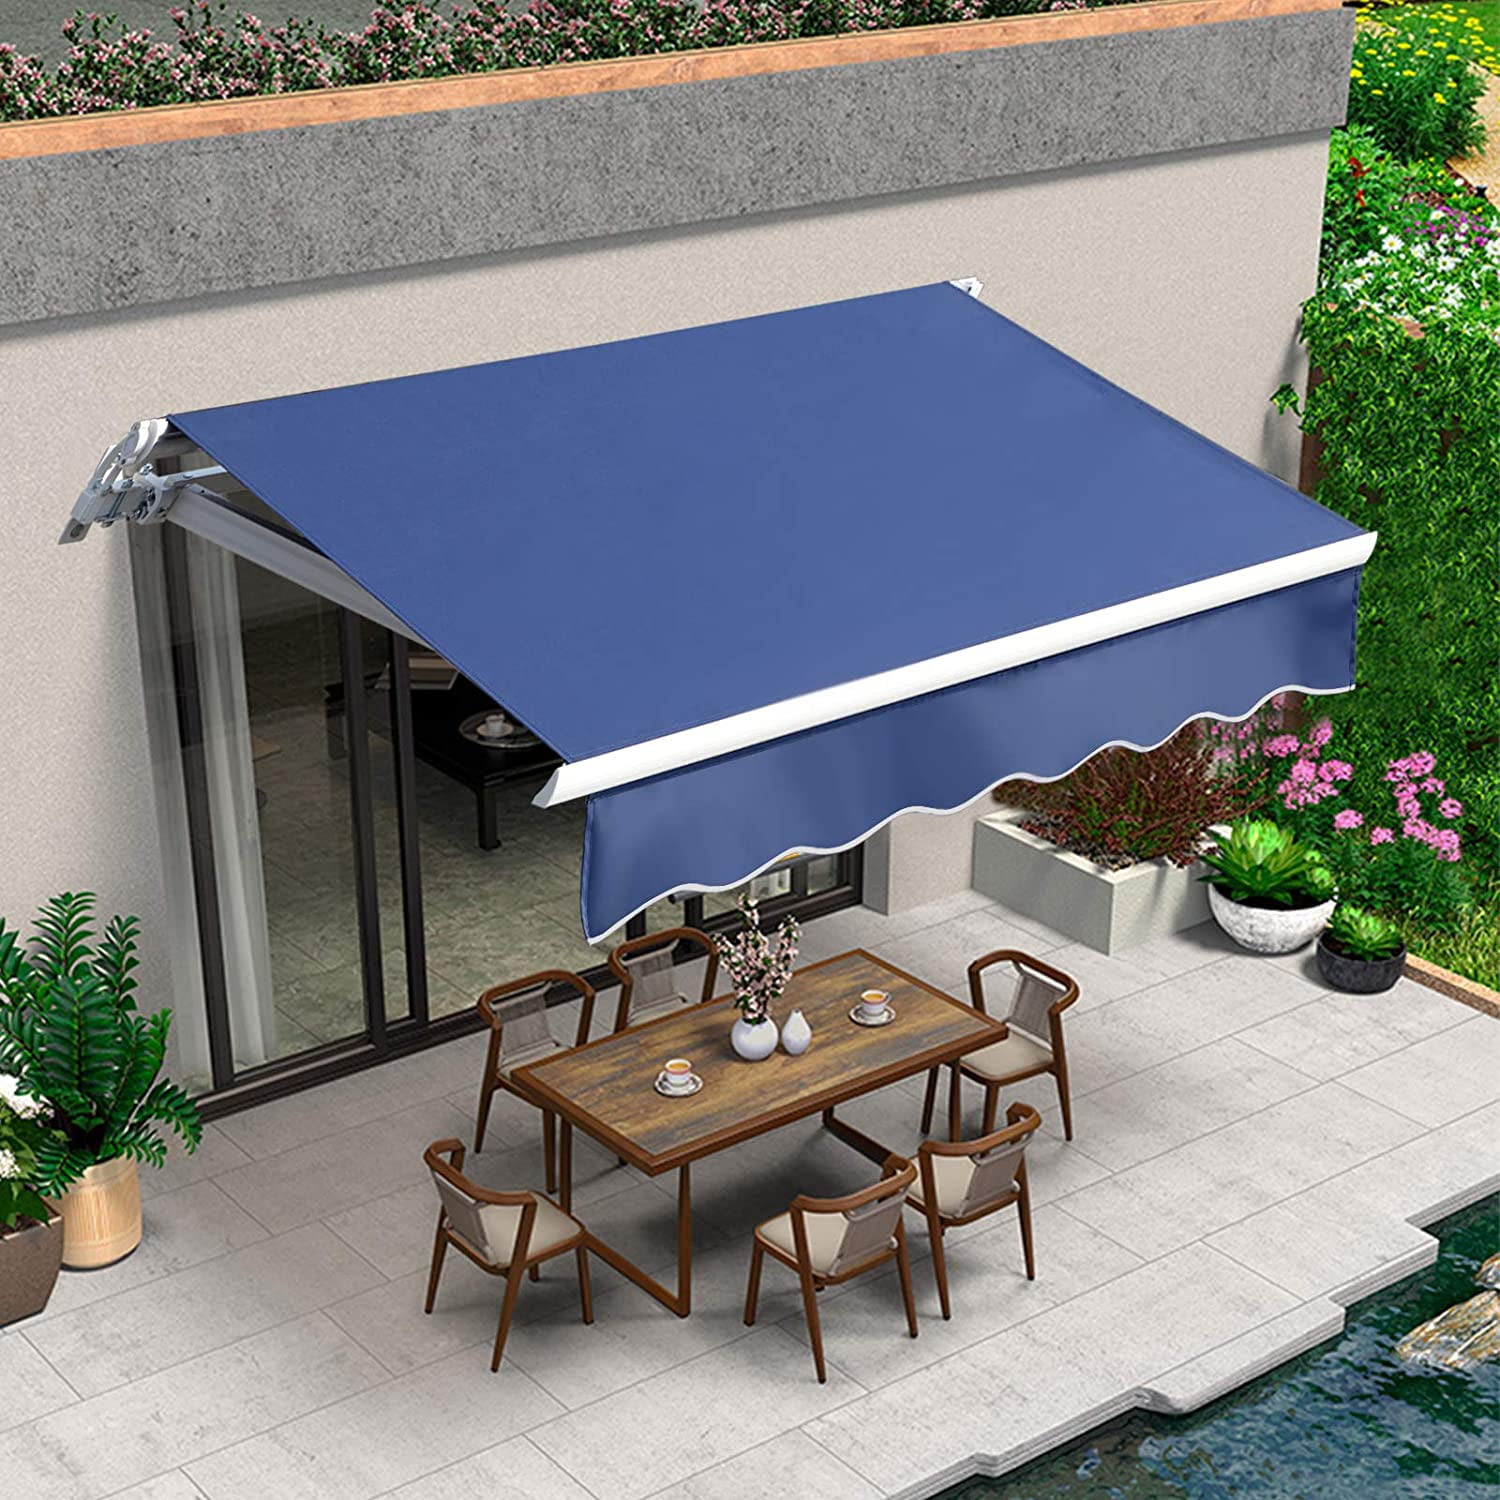 8.2'×6.5' Retractable Patio Awning Aluminum Deck Sunshade Shelter Outdoor Beige 